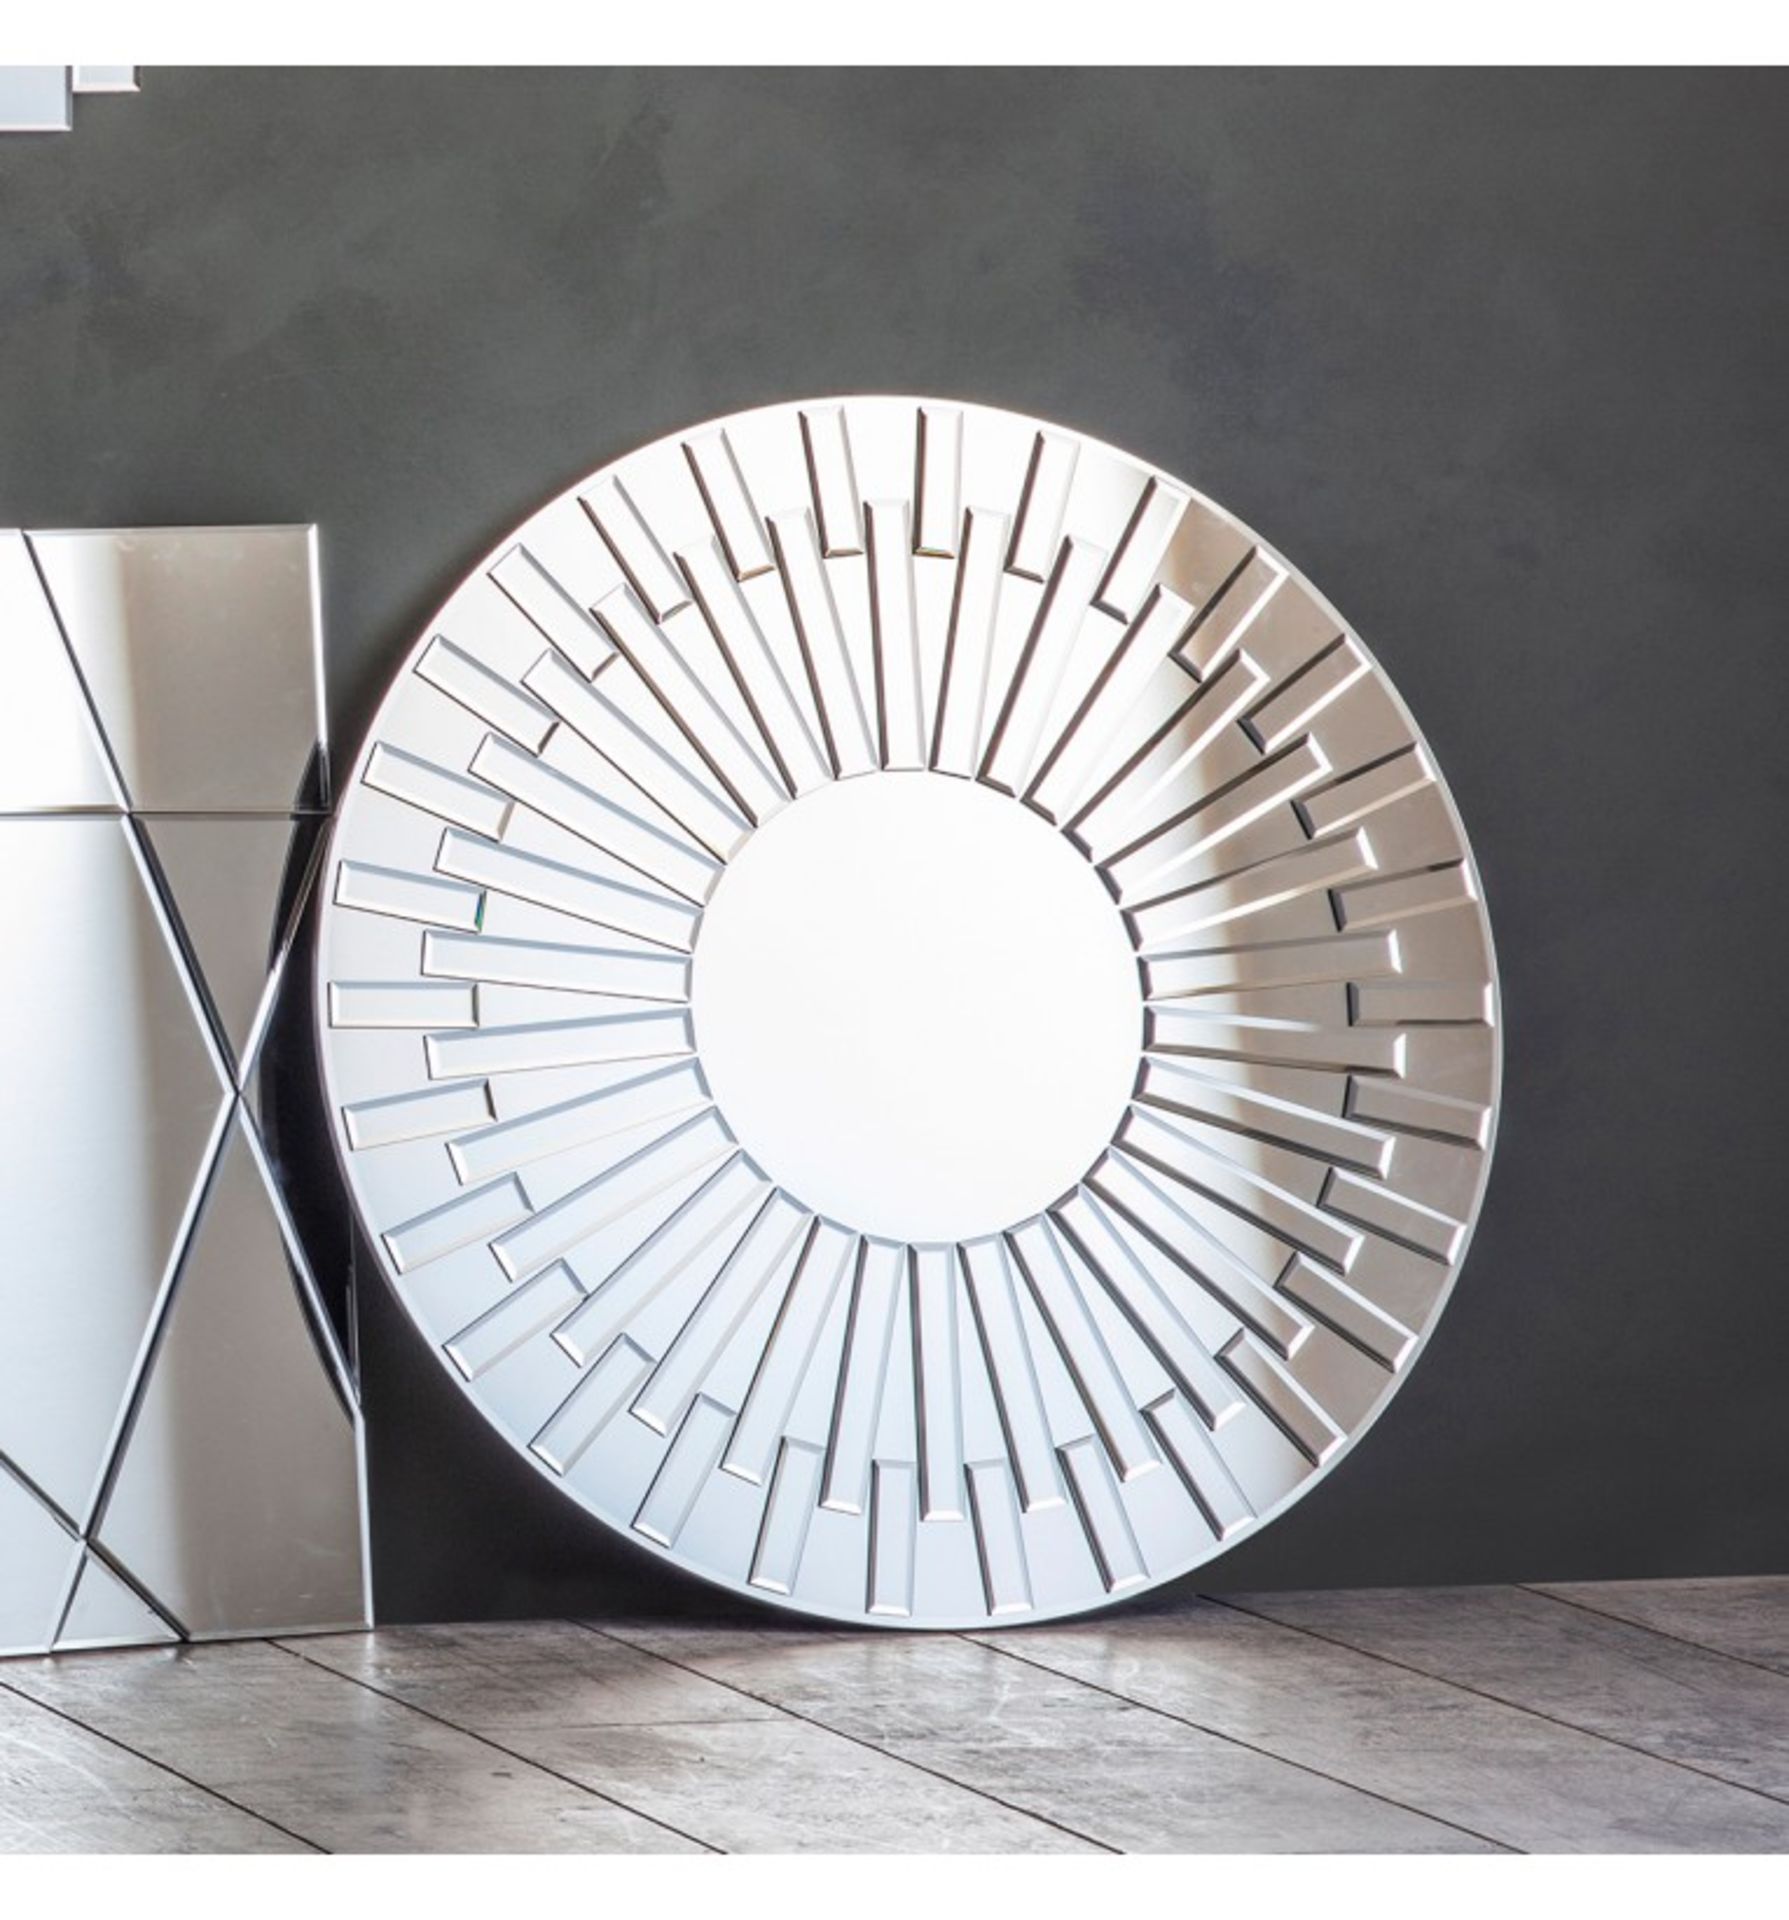 Seola Mirror A Contemporary Glass On Glass Starburst Style Round Mirror Complete Your Home And